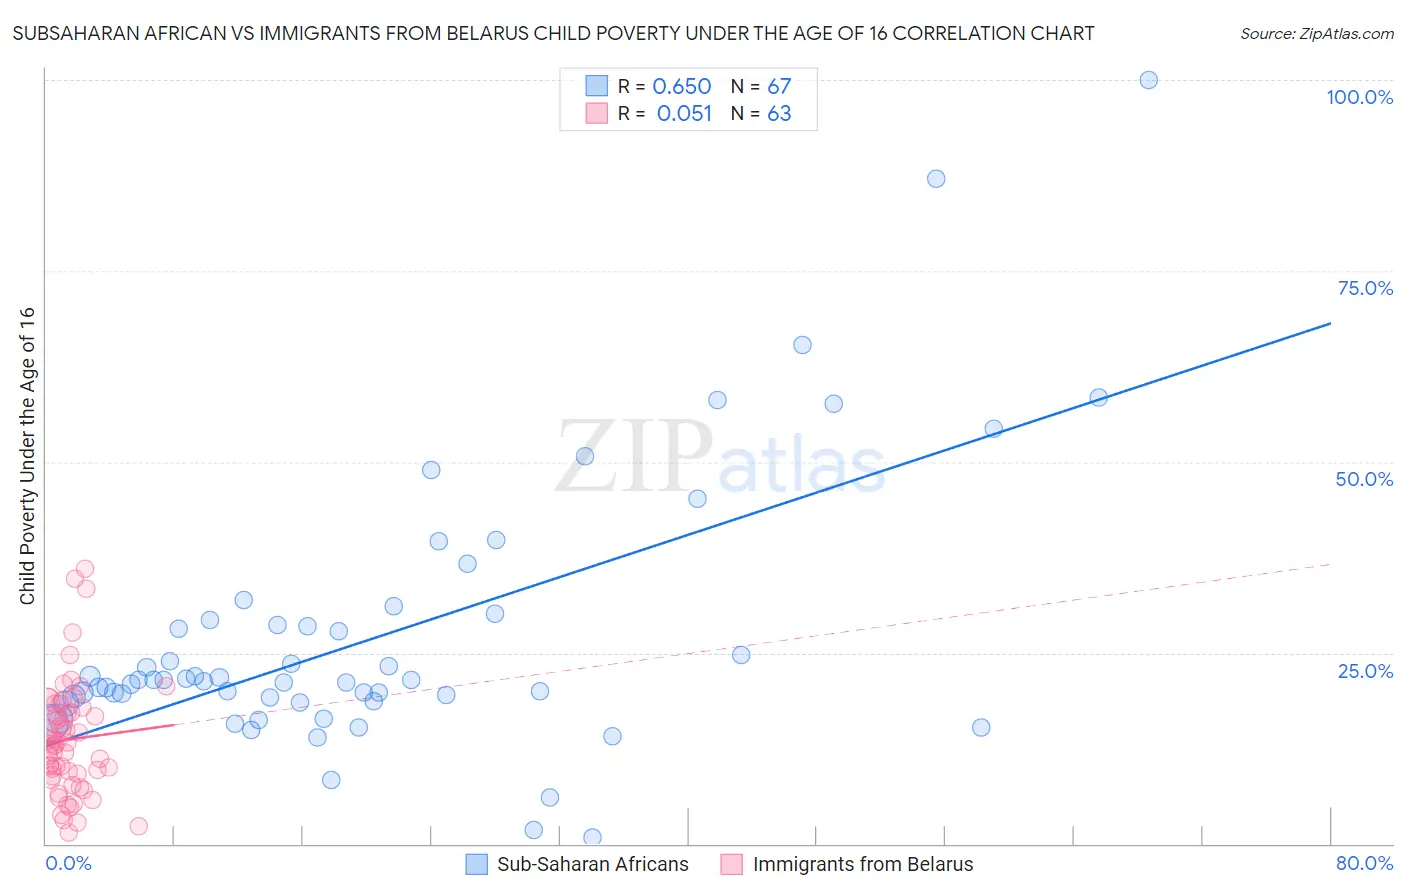 Subsaharan African vs Immigrants from Belarus Child Poverty Under the Age of 16